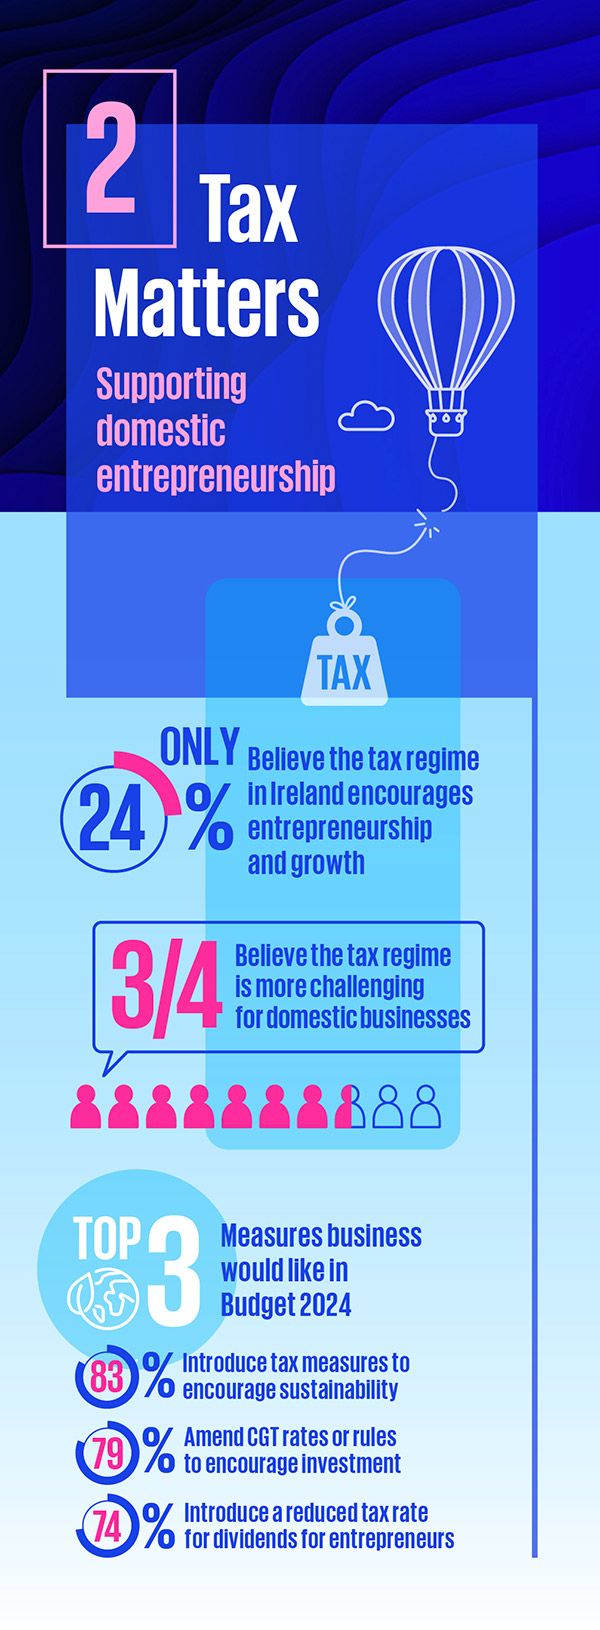 Tax Matters Encouraging and supporting domestic entrepreneurship. Only 24% Believe the tax regime favours multinationals more than domestic business. Top 3 Measures indigenous businesses would like in Budget 2024. 83% Tax measures to encourage sustainable behaviour. 79% Amend Capital Gains Tax rates or rules. 74% Reduce tax rate for dividends for entrepreneurs.